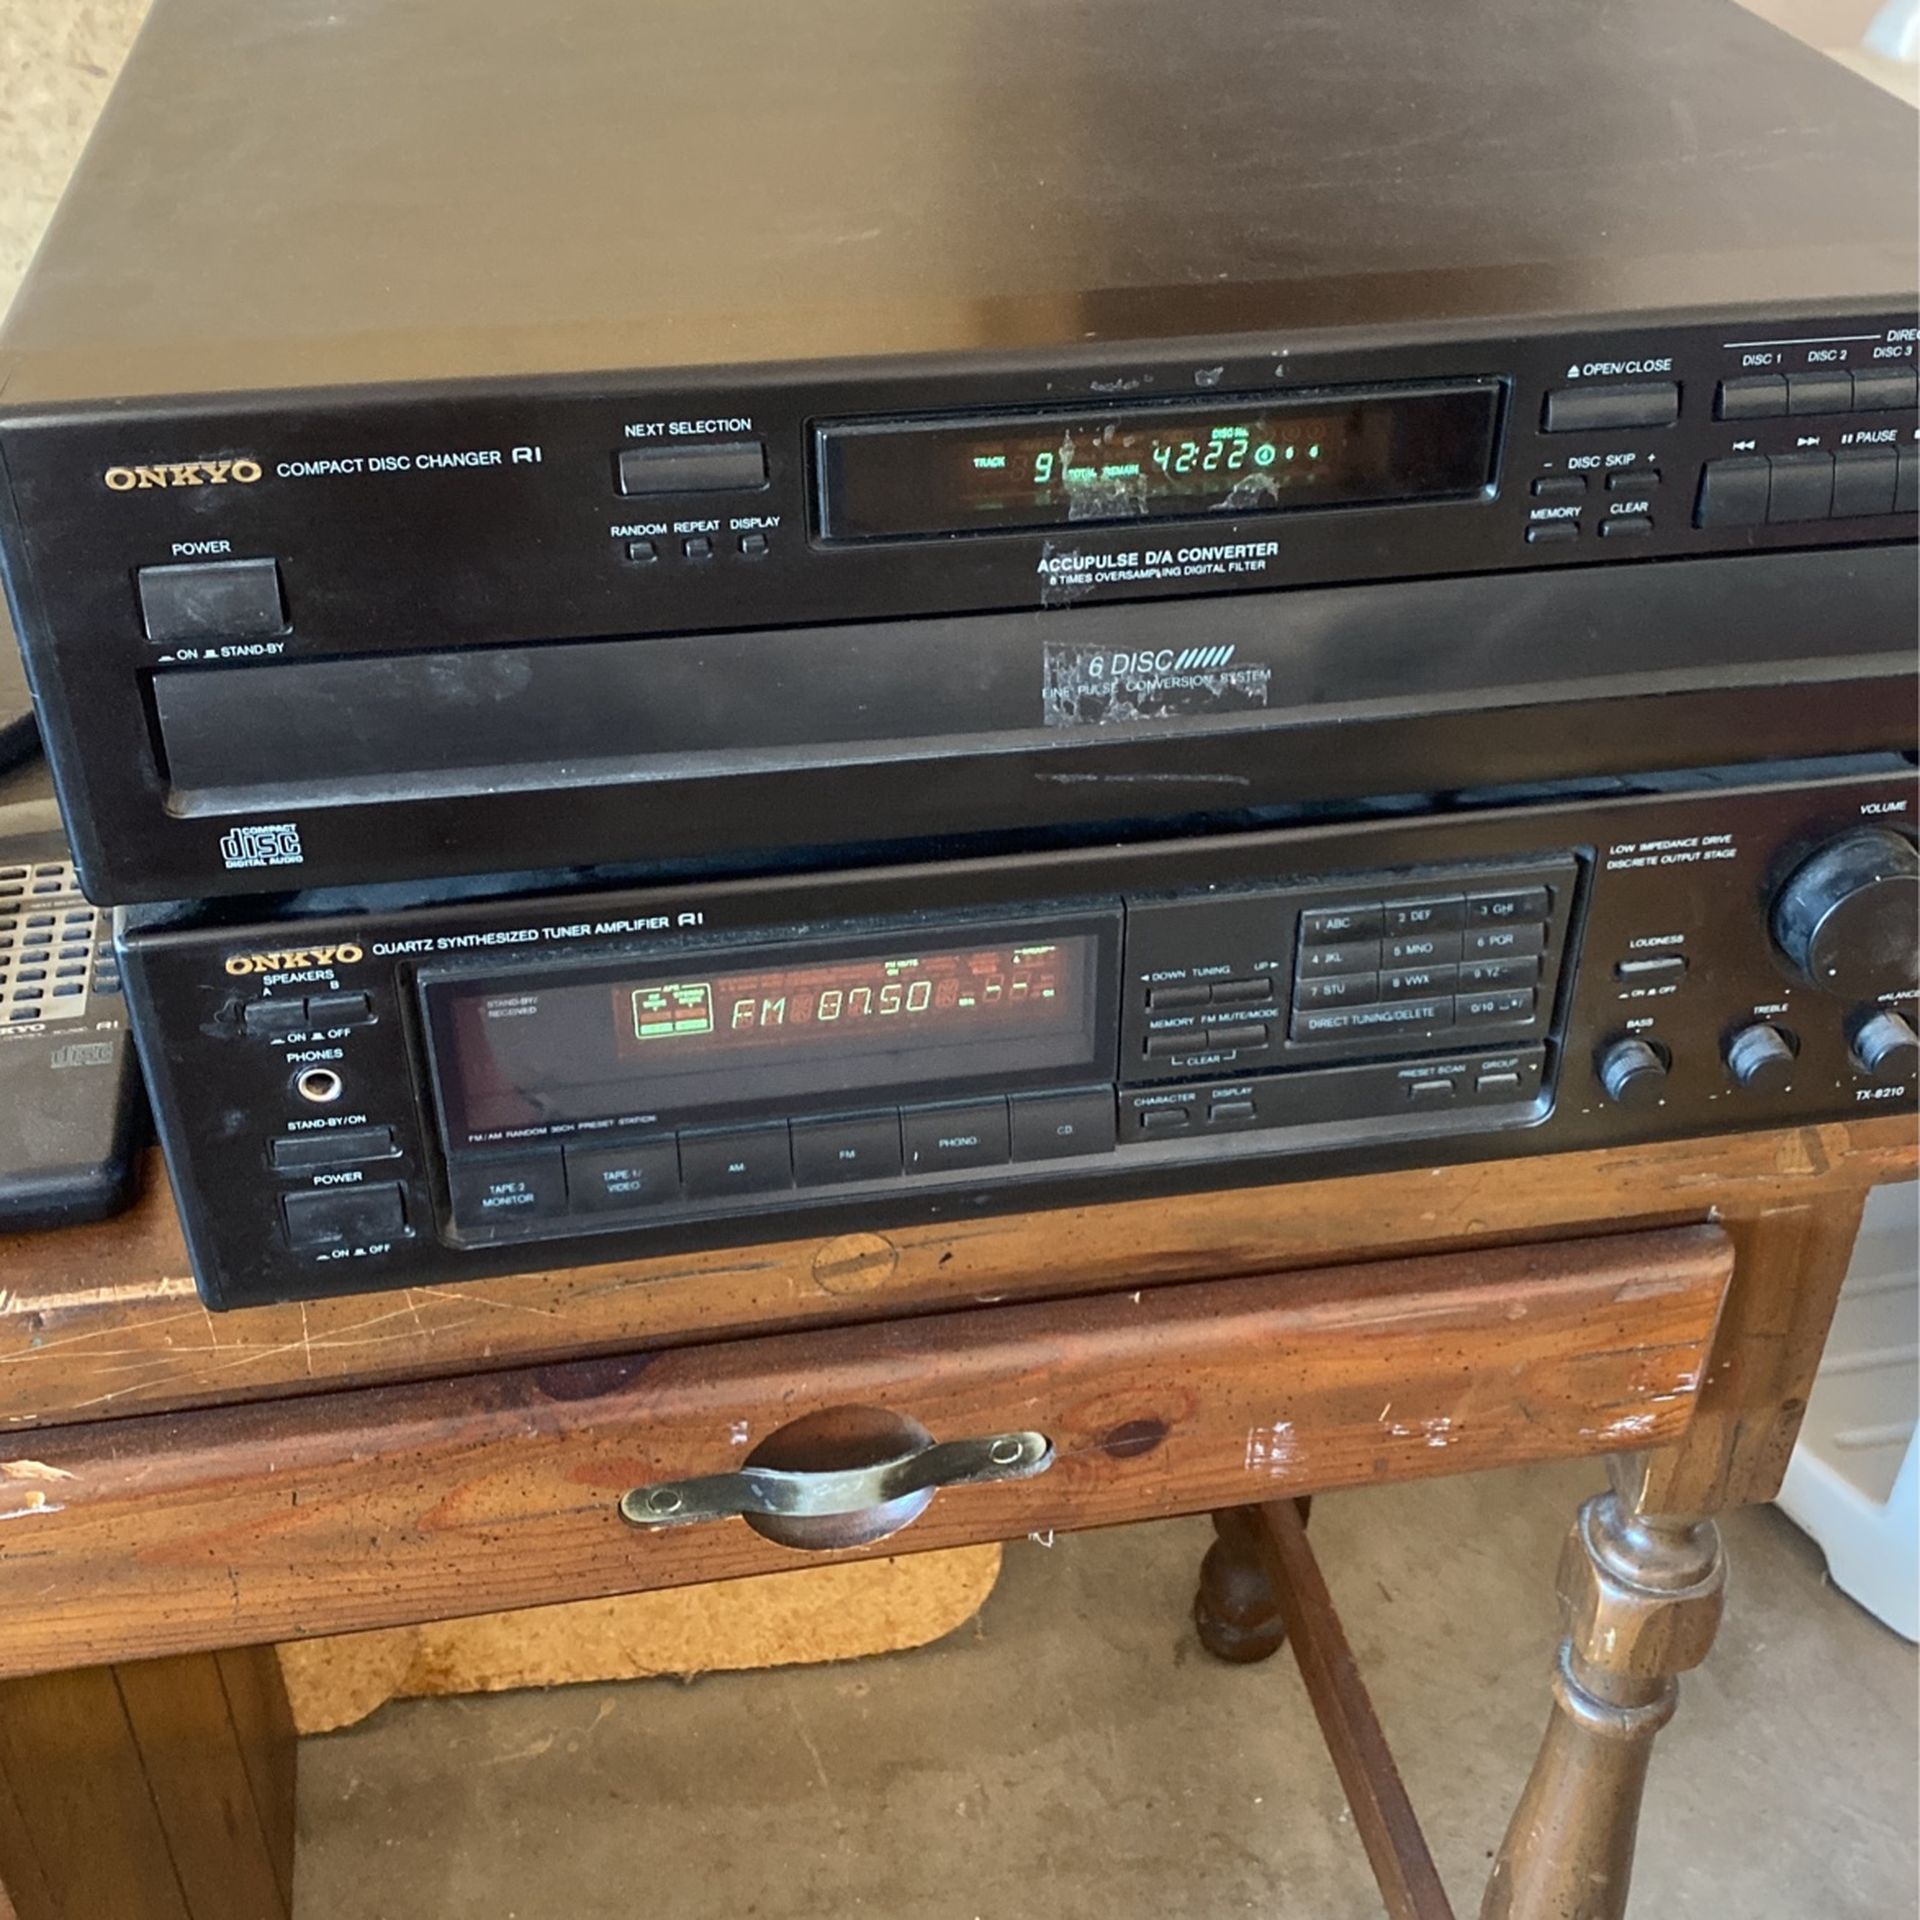 Vintage Onkyo Stereo Receiver And 6 Disc Changer $50 OBO